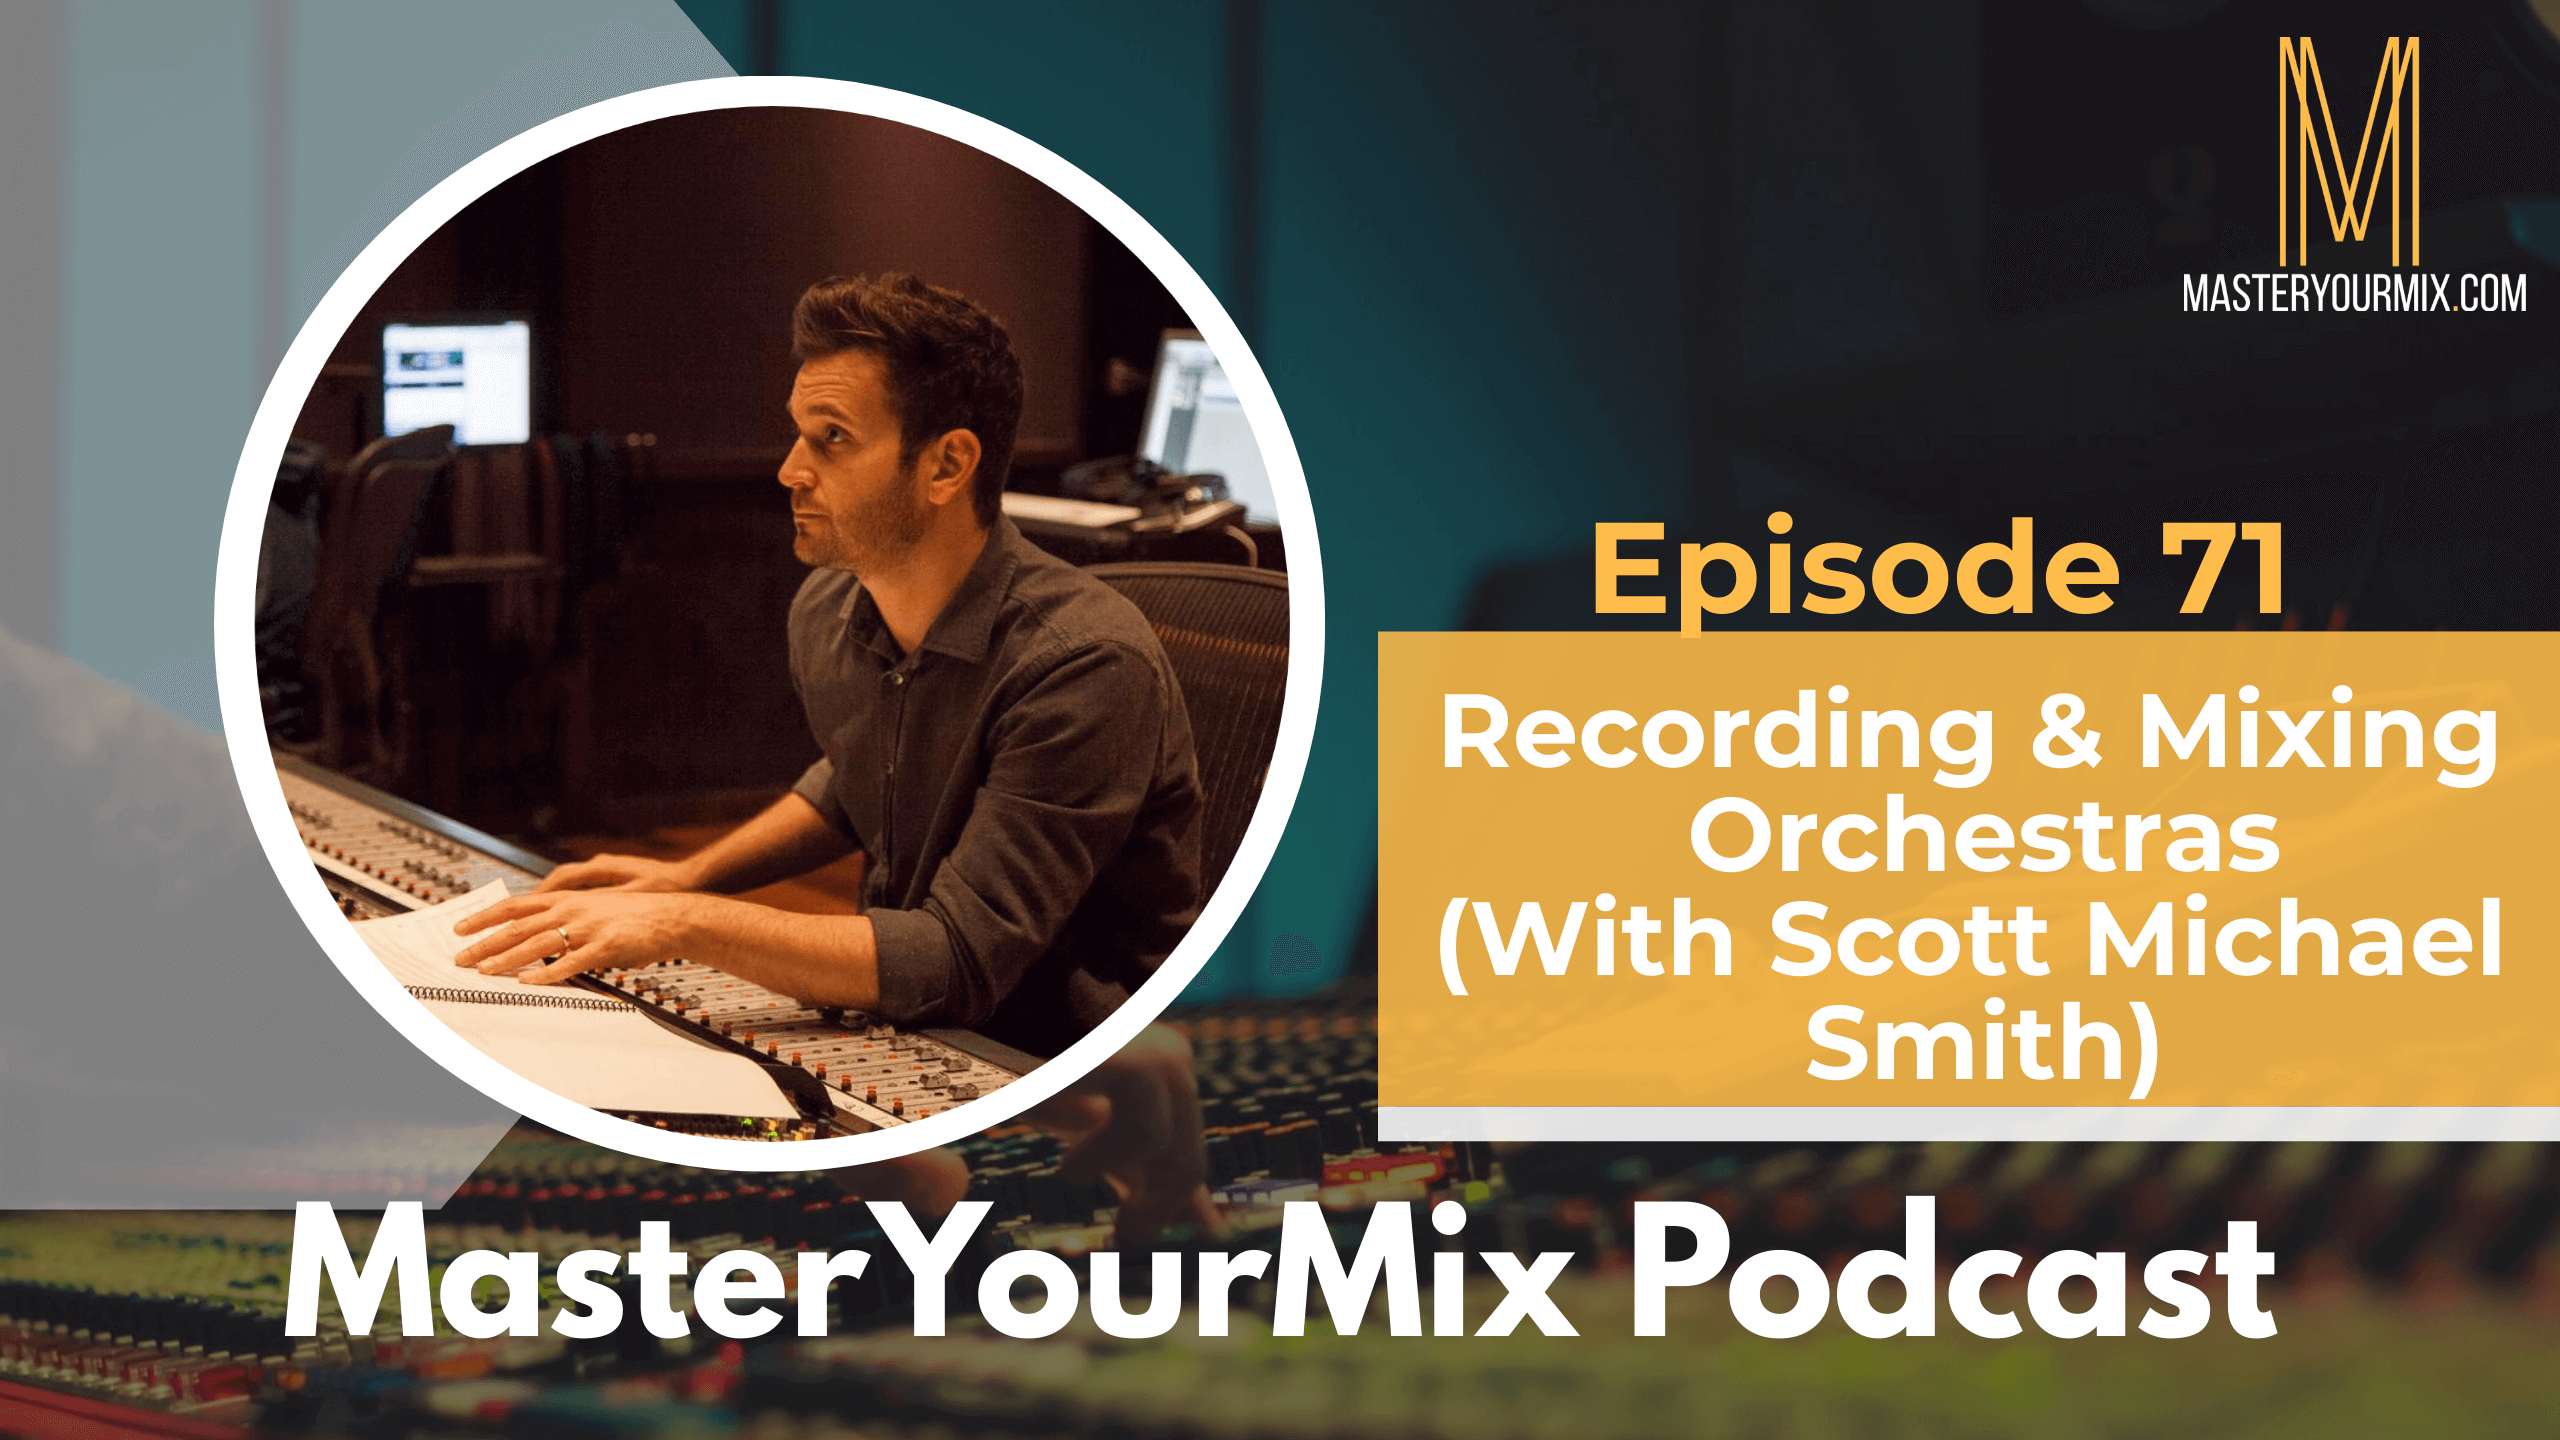 master your mix podcast, ep 71 scott michael smith